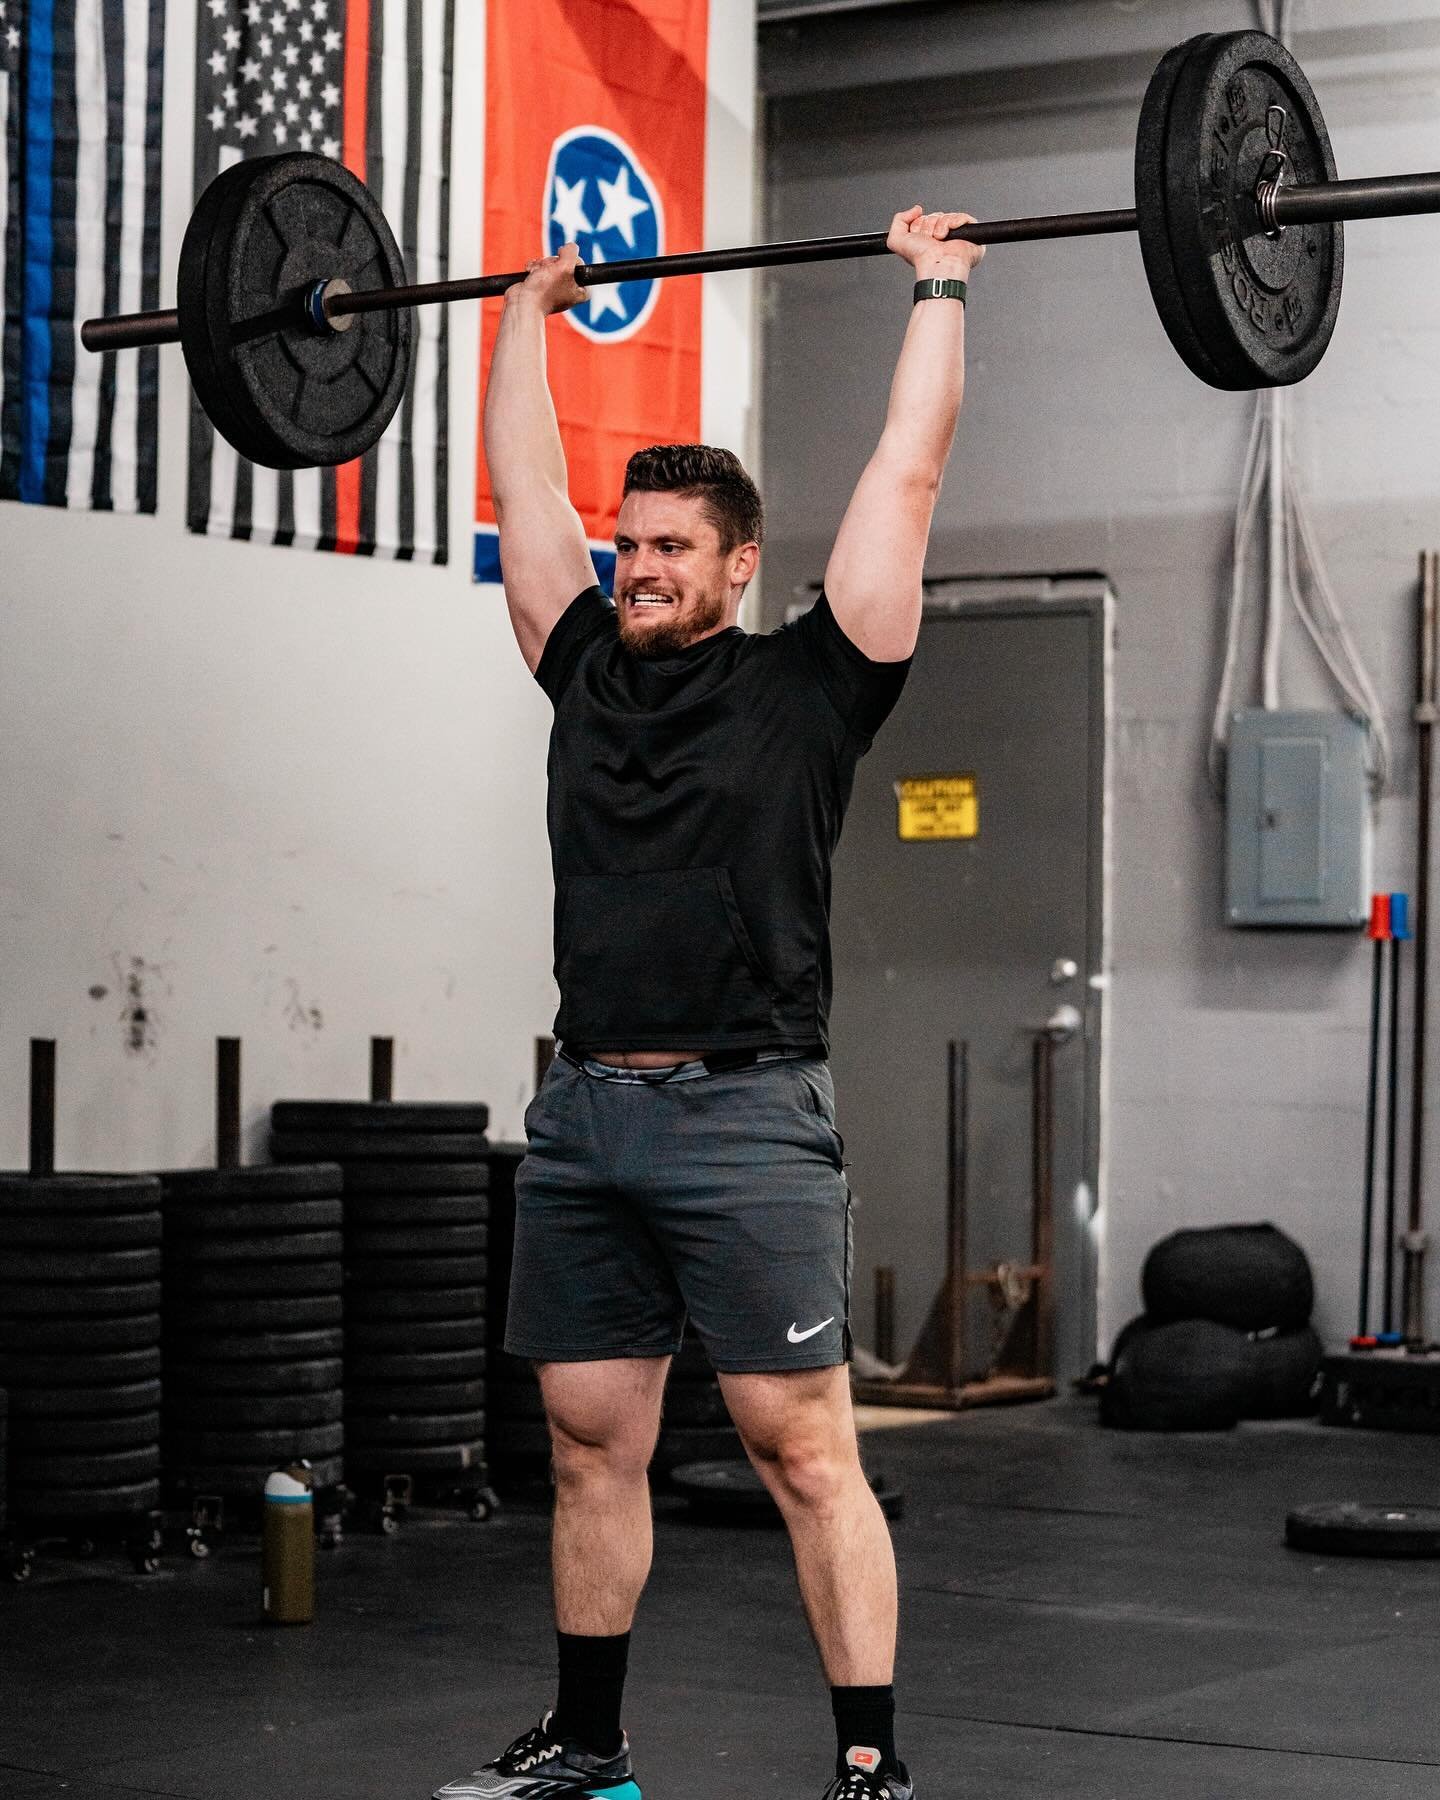 What is fitness? Fitness is your work capacity across broad time and modal domains. Modal domains are simply the different movements you are taking on (pull-ups, running, clean &amp; jerk, etc.) This means fitness is measurable which is exactly what 